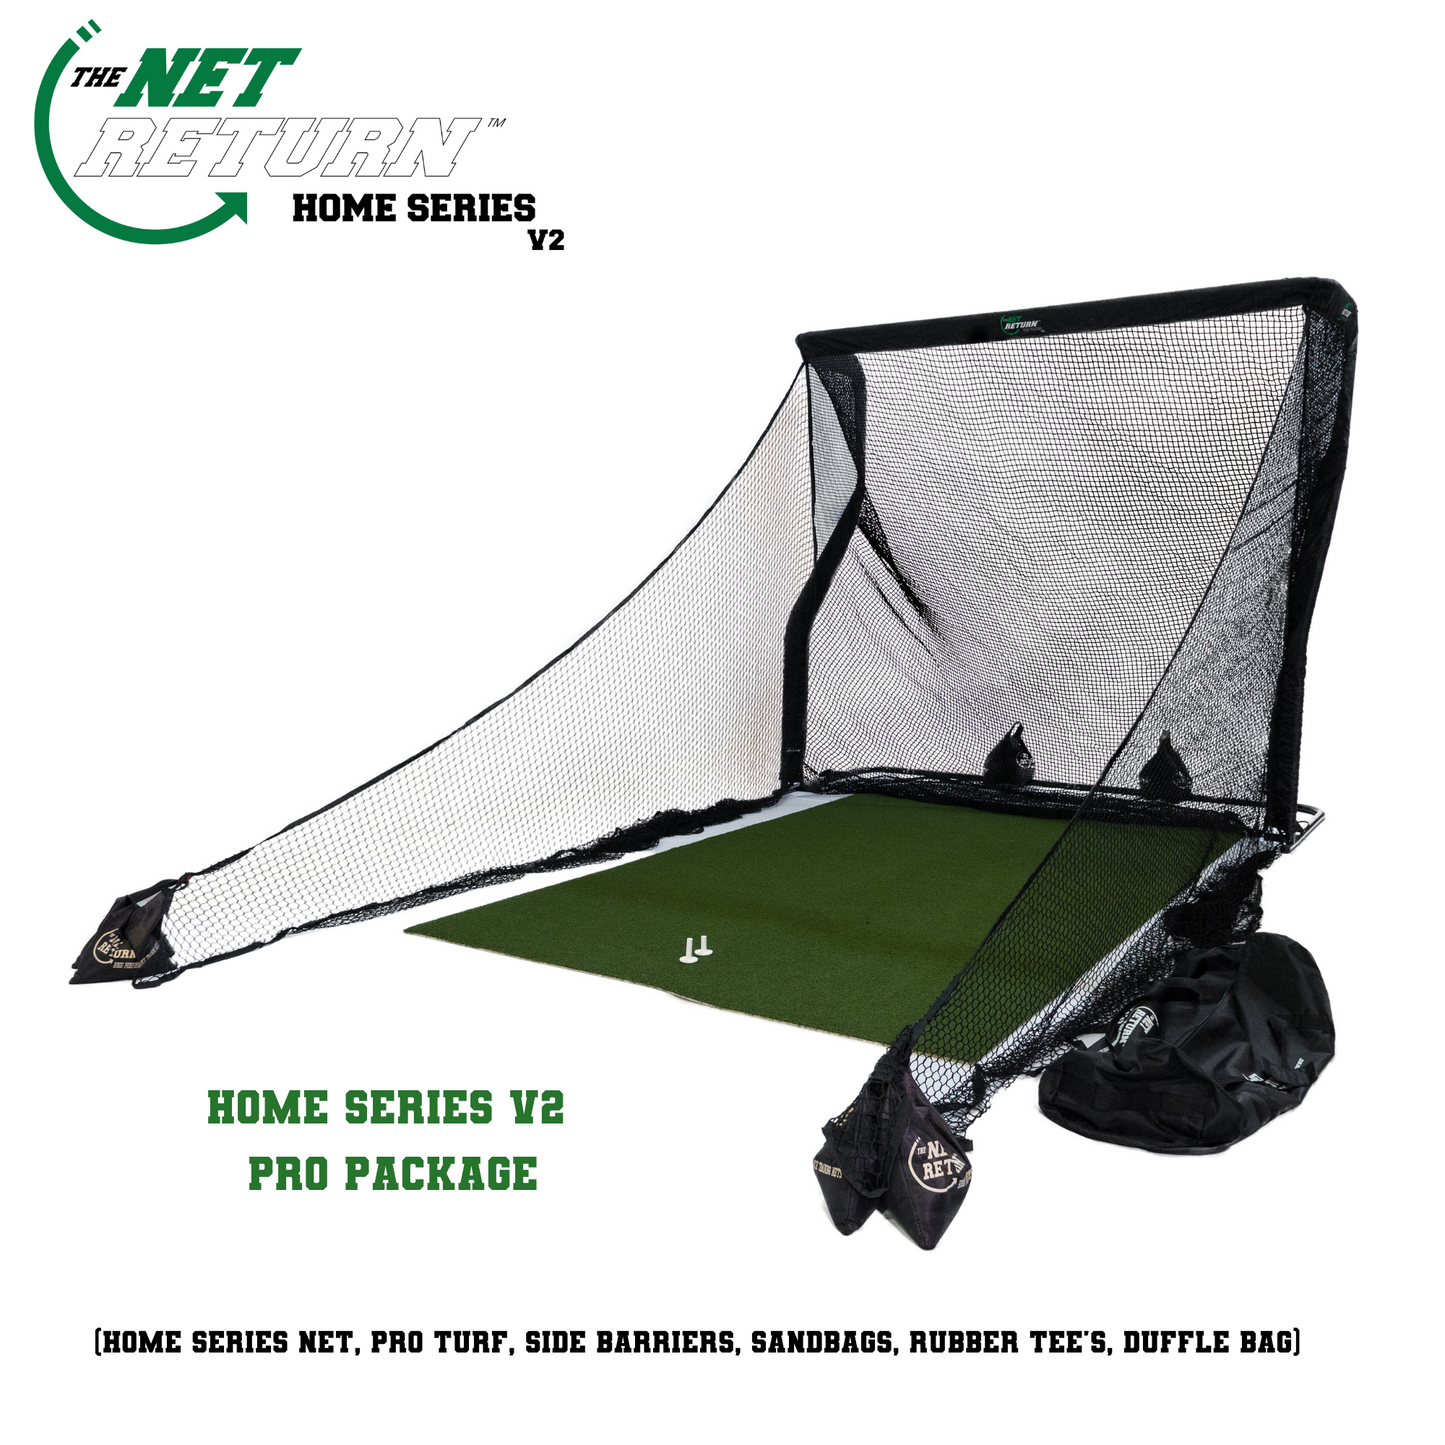 Net Return Home Series V2 Pro Package 45 Degree Angle View